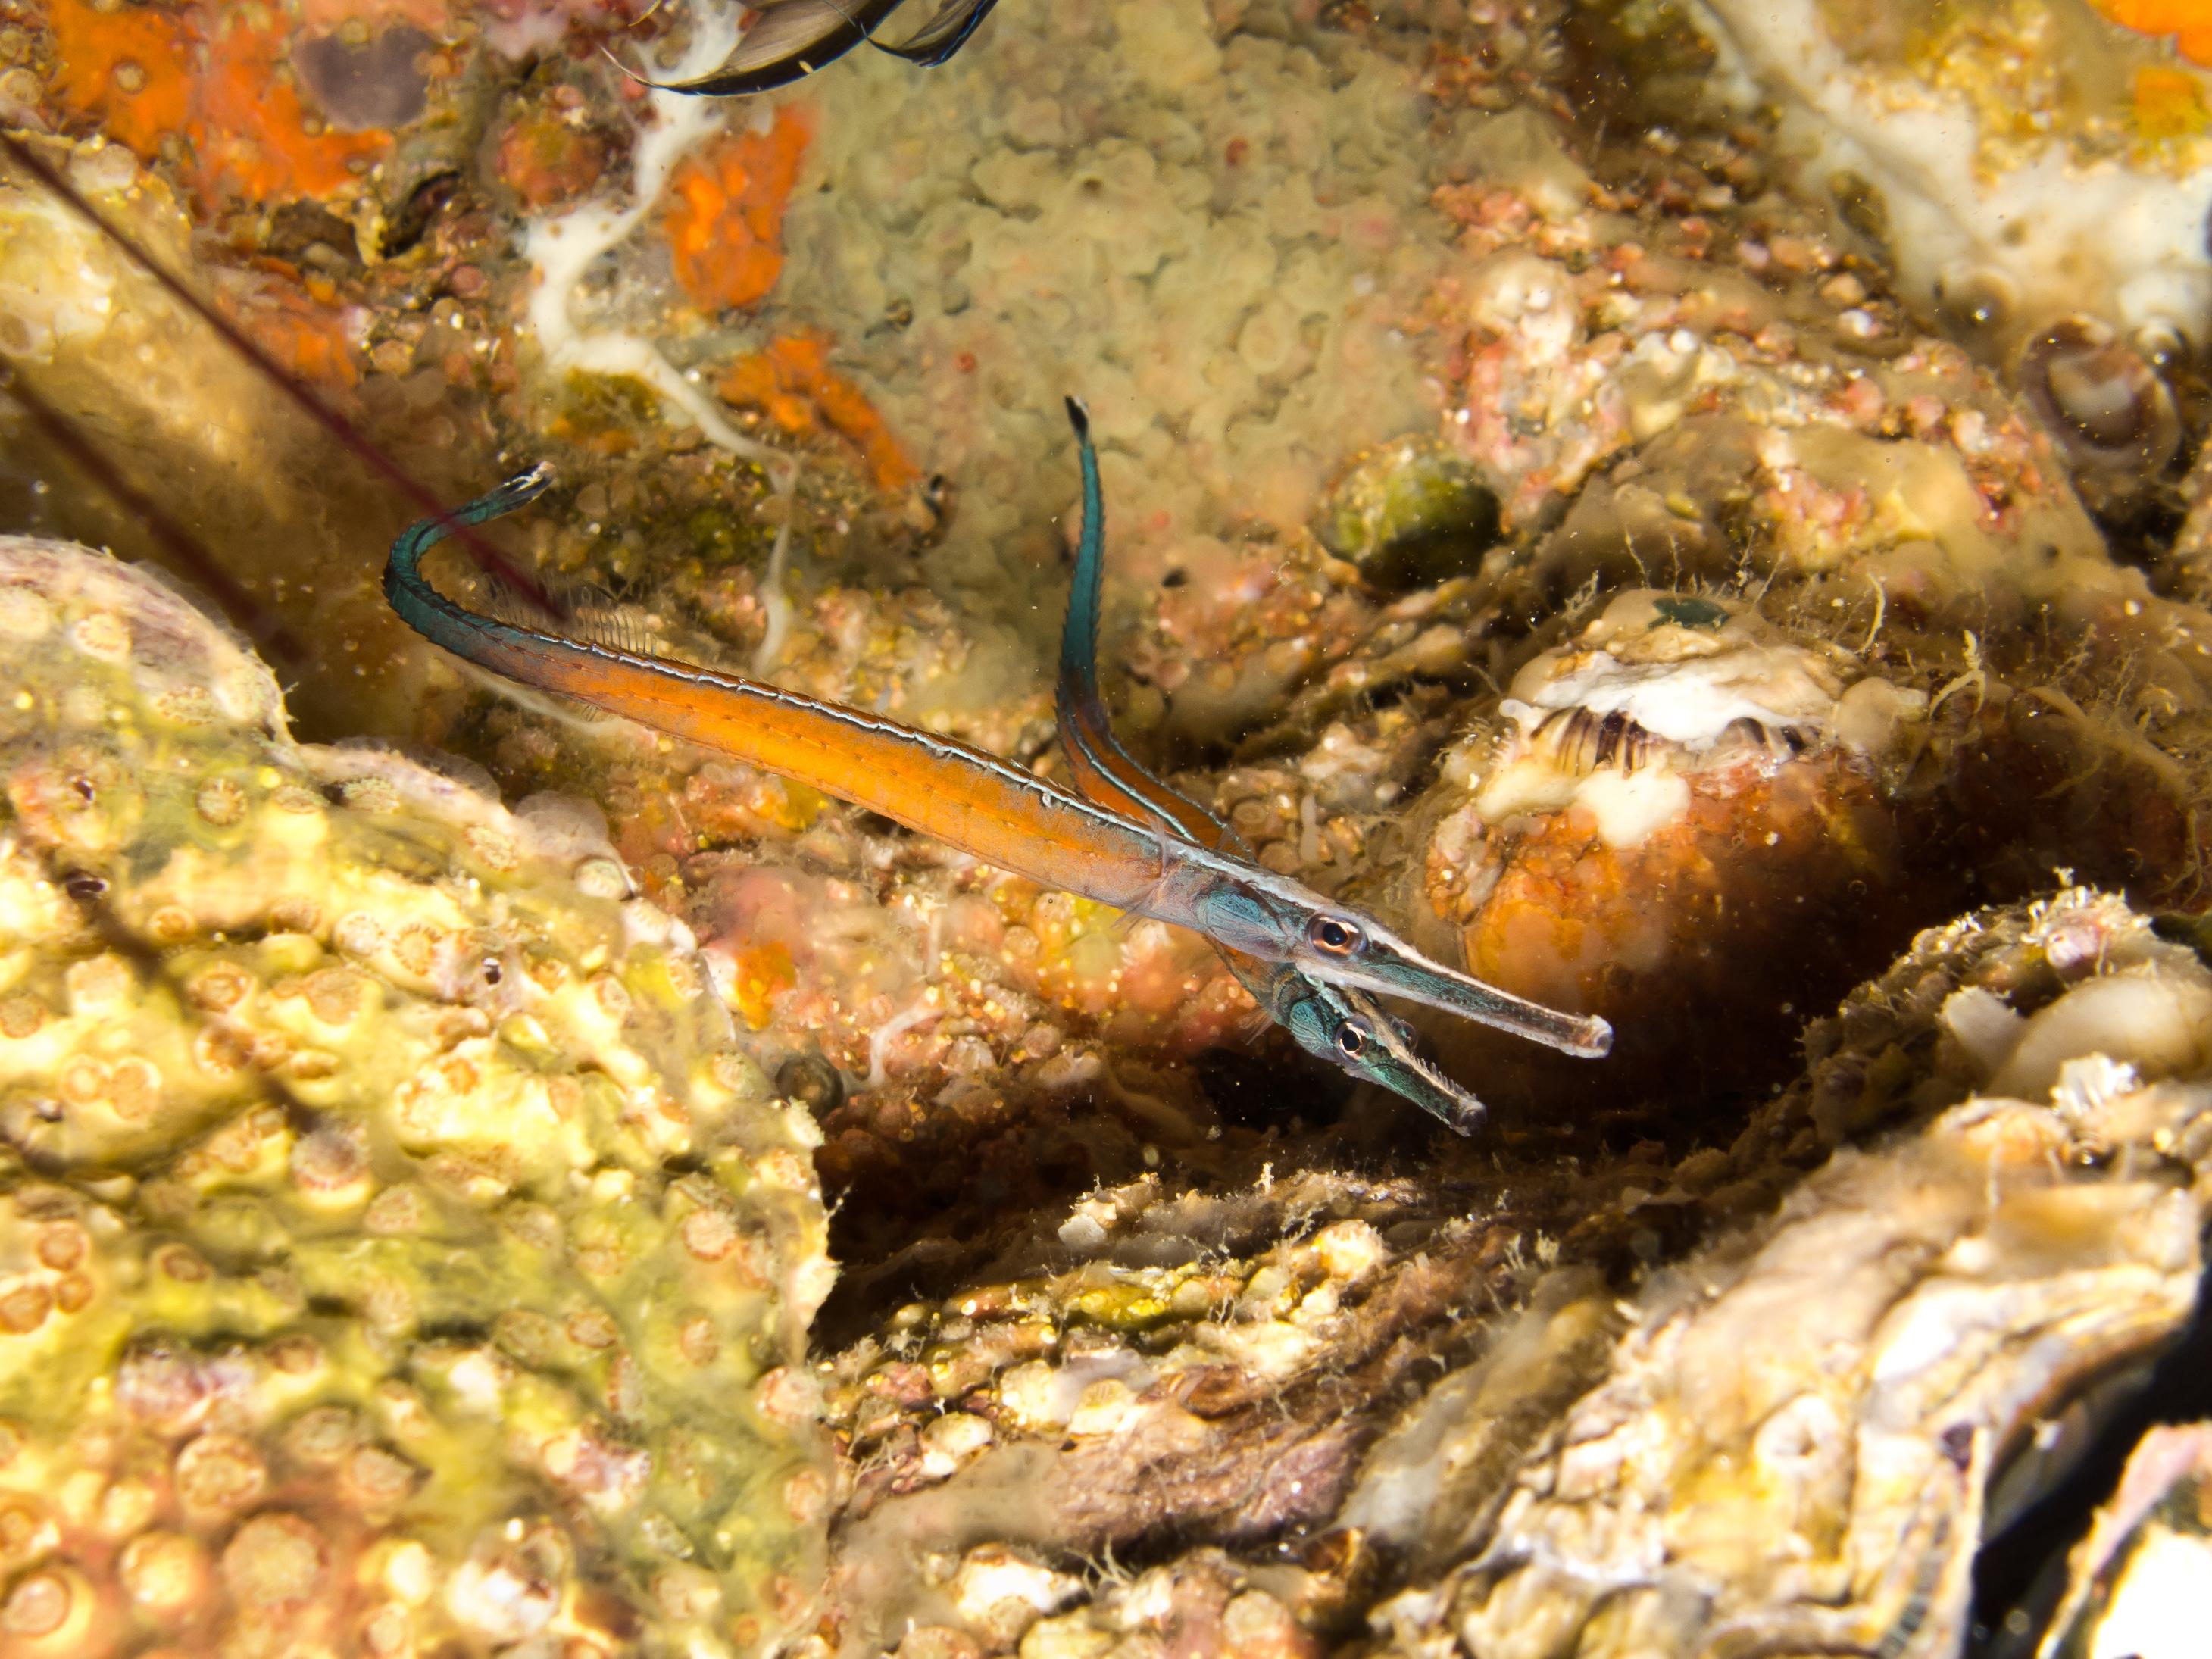 A photo of Janss' pipefish